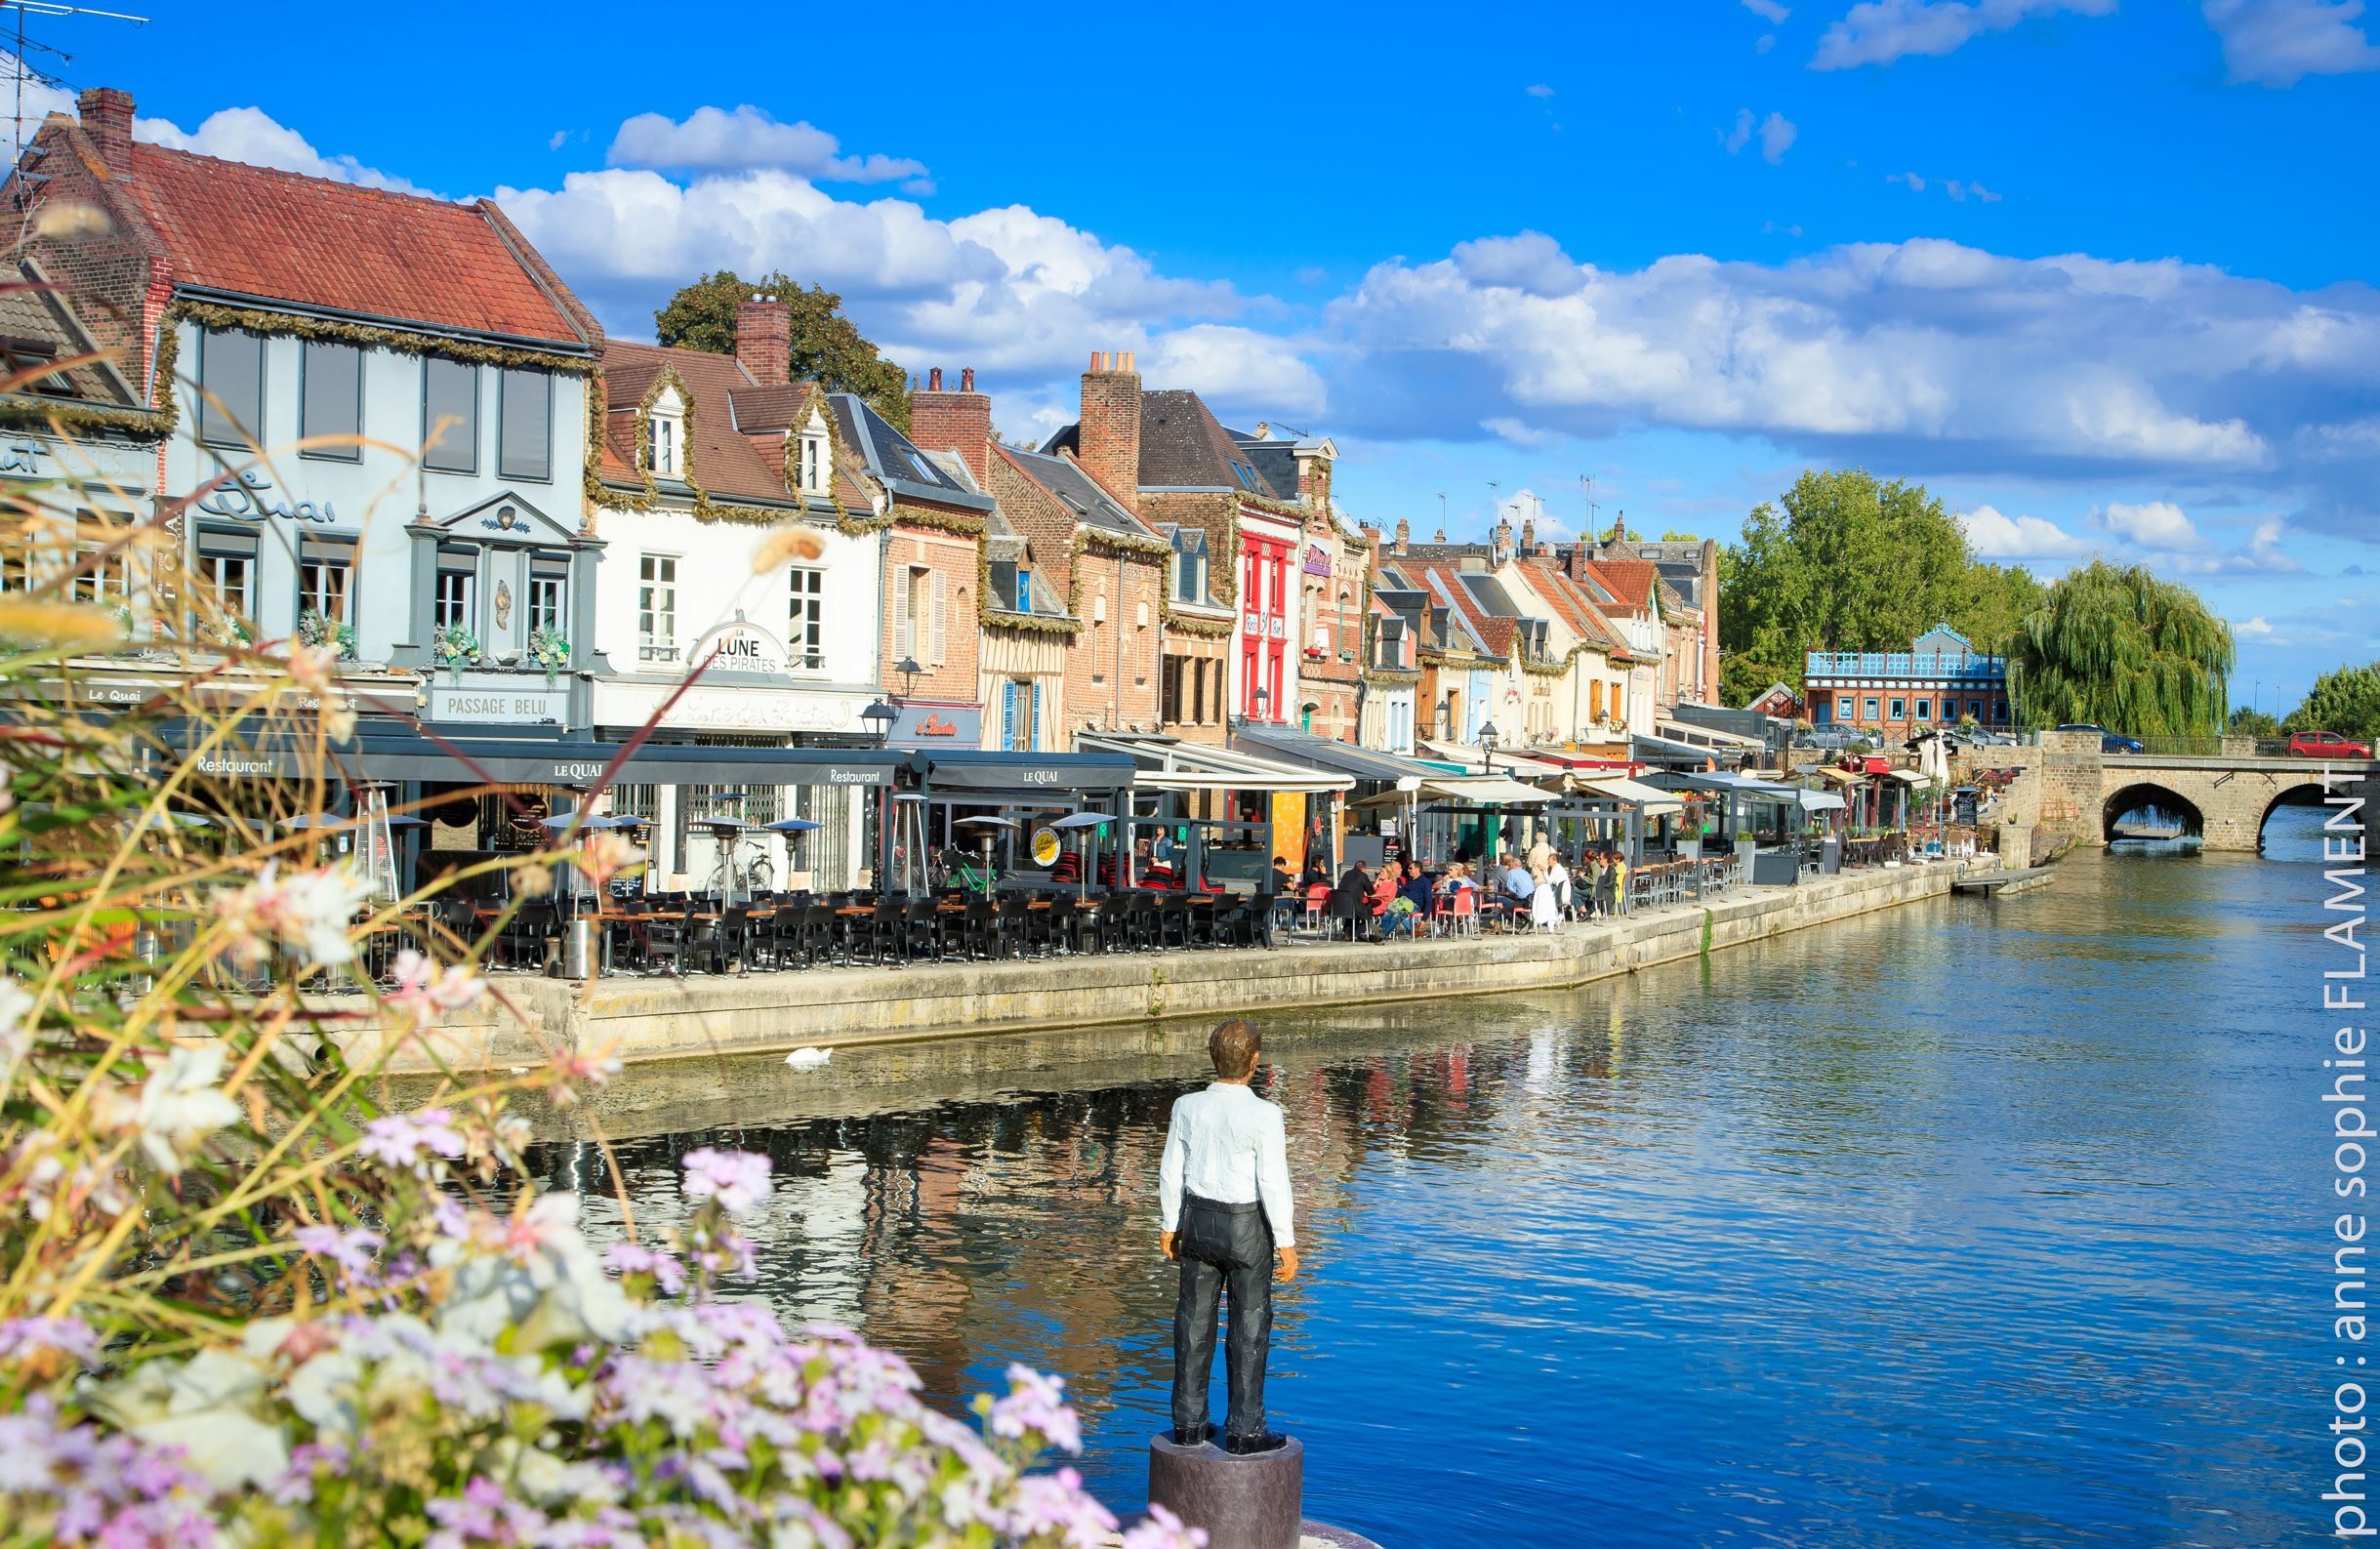 There’s a great choice of bars and restaurants in Amiens’ colourful and characterful old town, the waterside Saint-Leu district